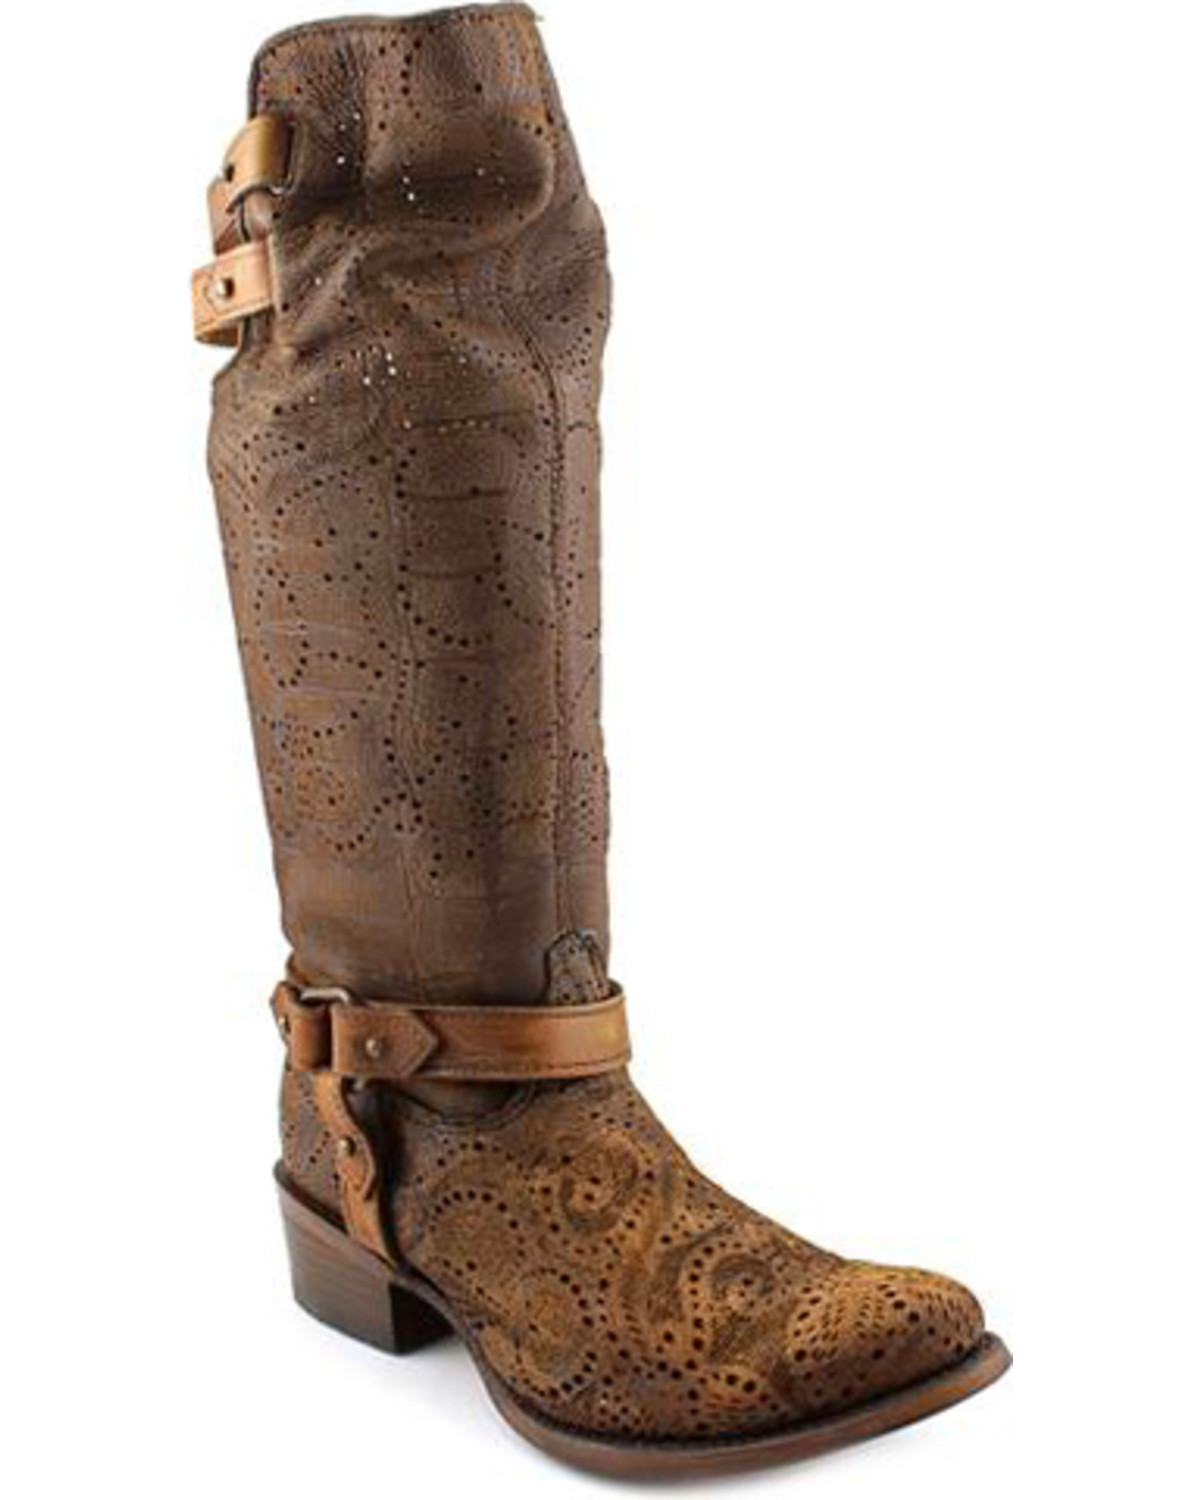 CORRAL P5100 Distressed Brown Tall Harness Boots with Zip Back